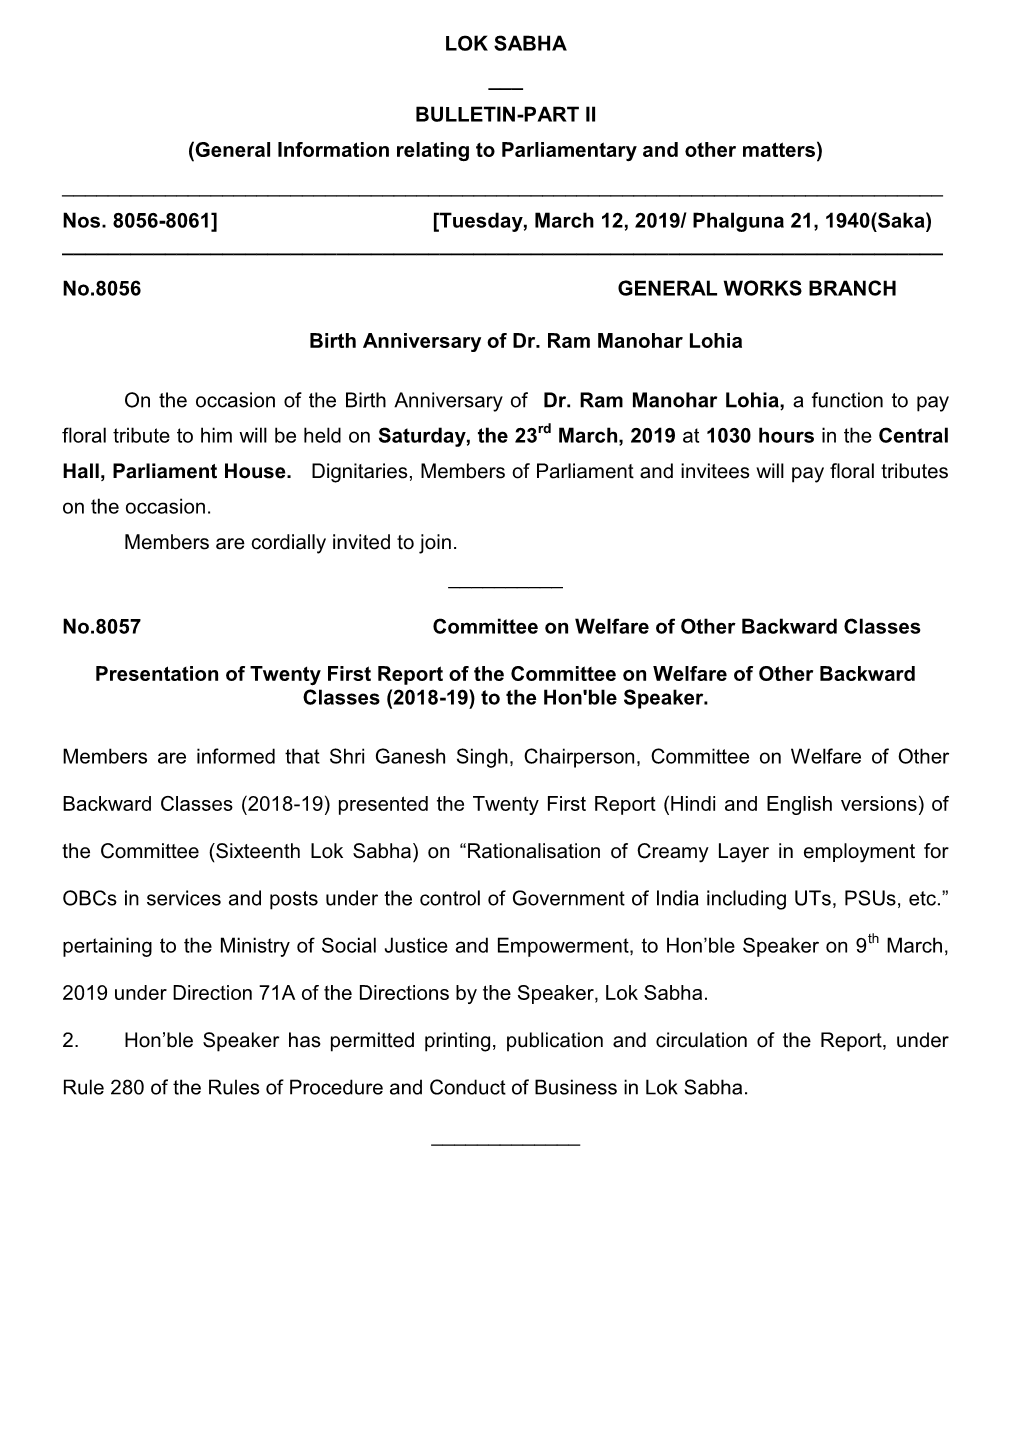 LOK SABHA ___ BULLETIN-PART II (General Information Relating to Parliamentary and Other Matters) ______Nos